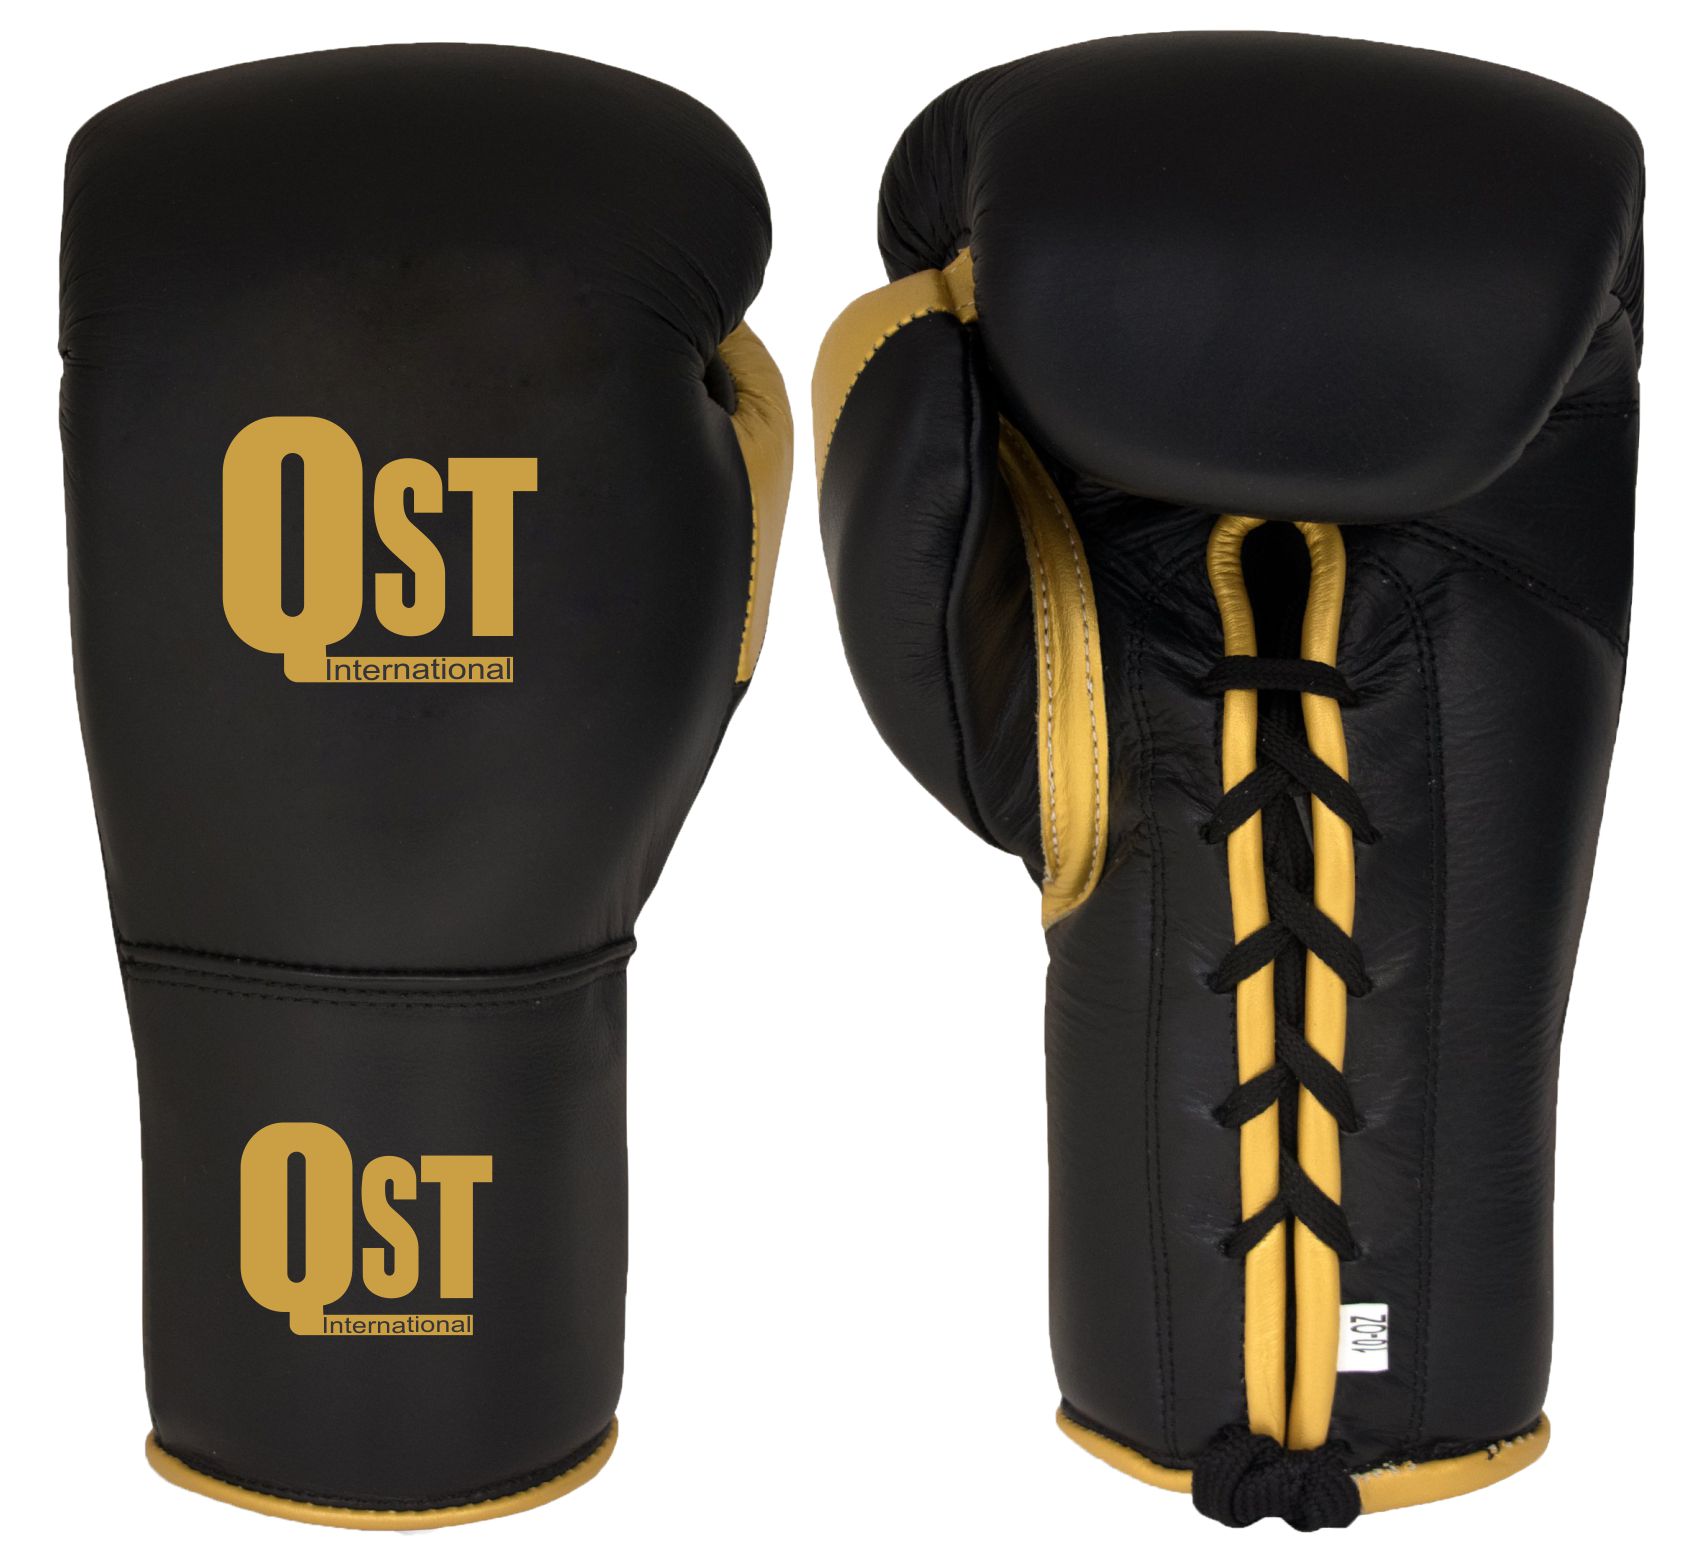 Lace up Boxing Gloves